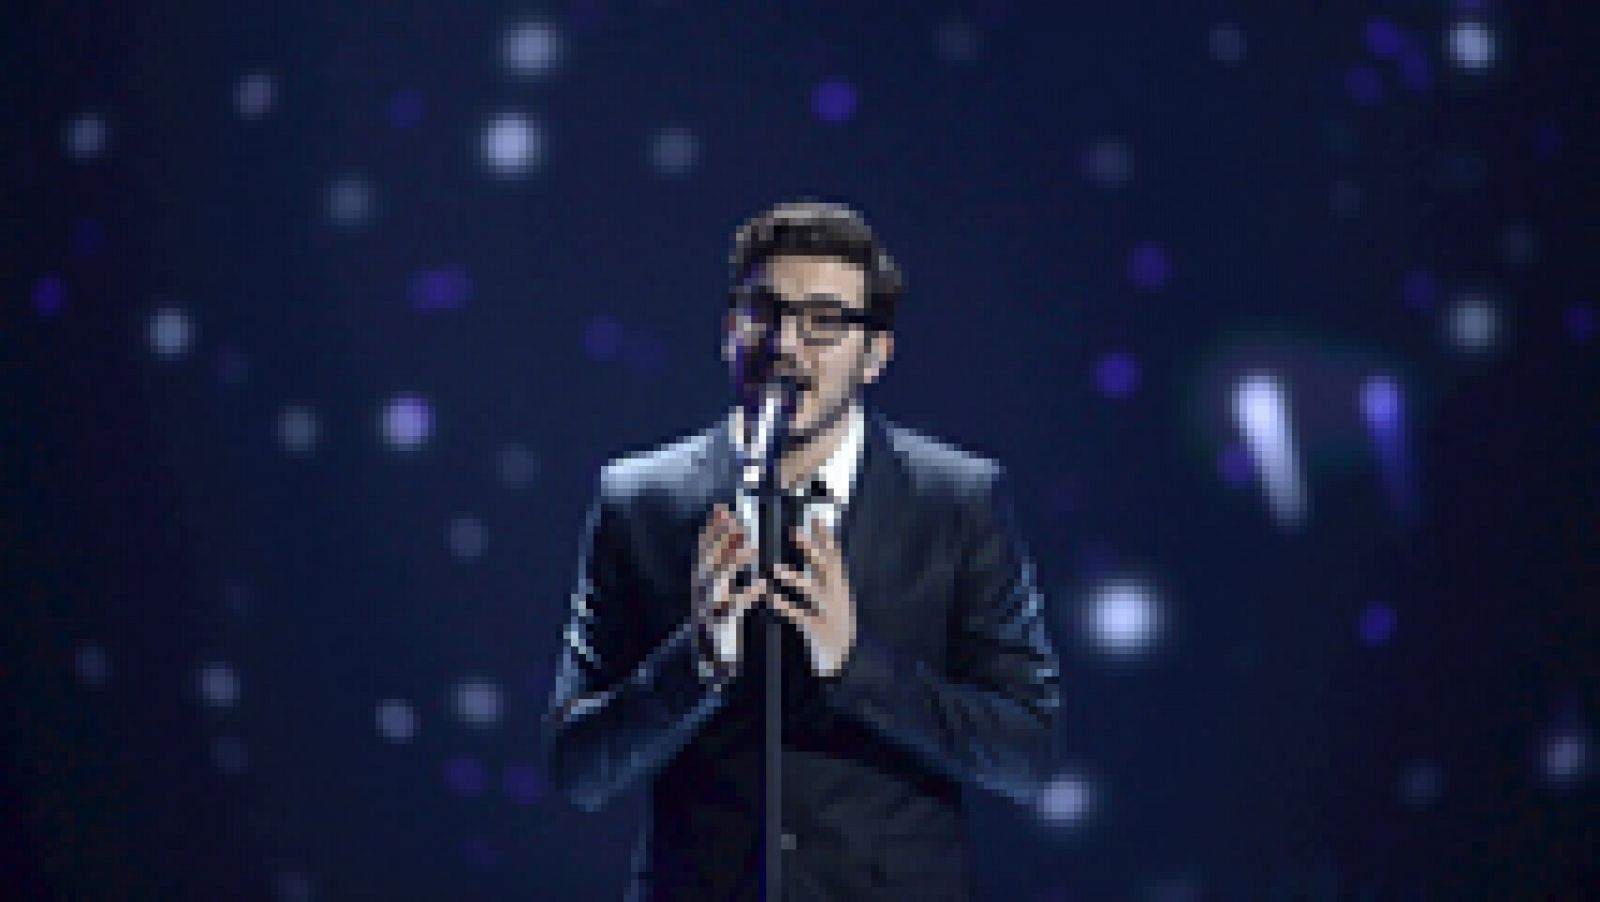 Eurovisión 2015 - Semifinal 2 - Chipre: Giannis Karagiannis canta 'One Thing I Should Have Done'